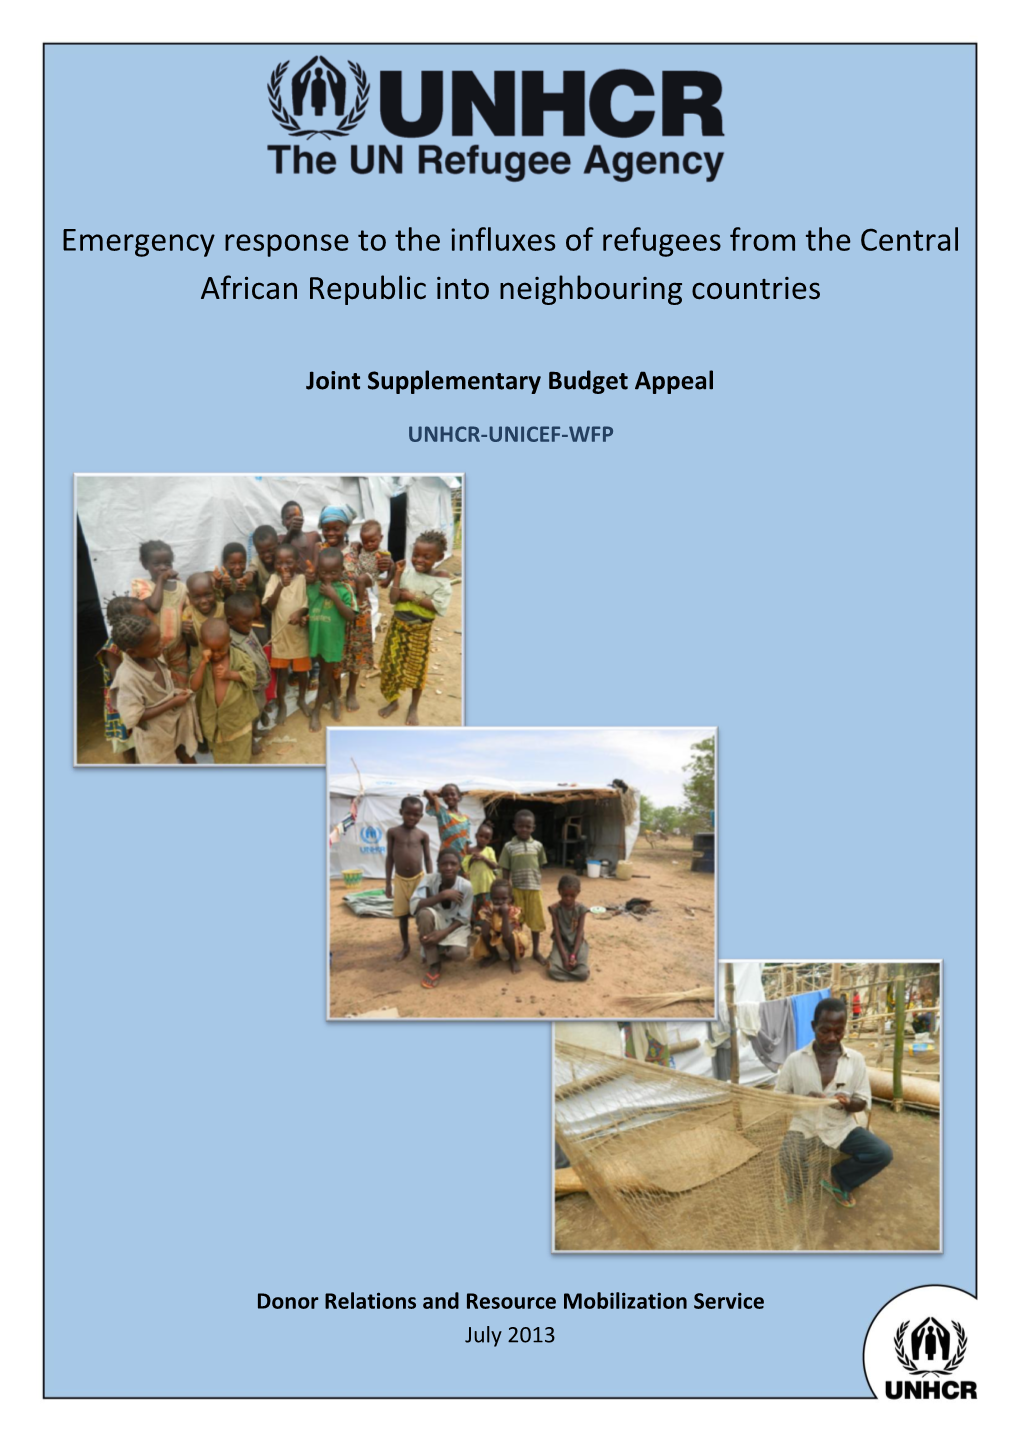 Emergency Response to the Influxes of Refugees from the Central African Republic Into Neighbouring Countries